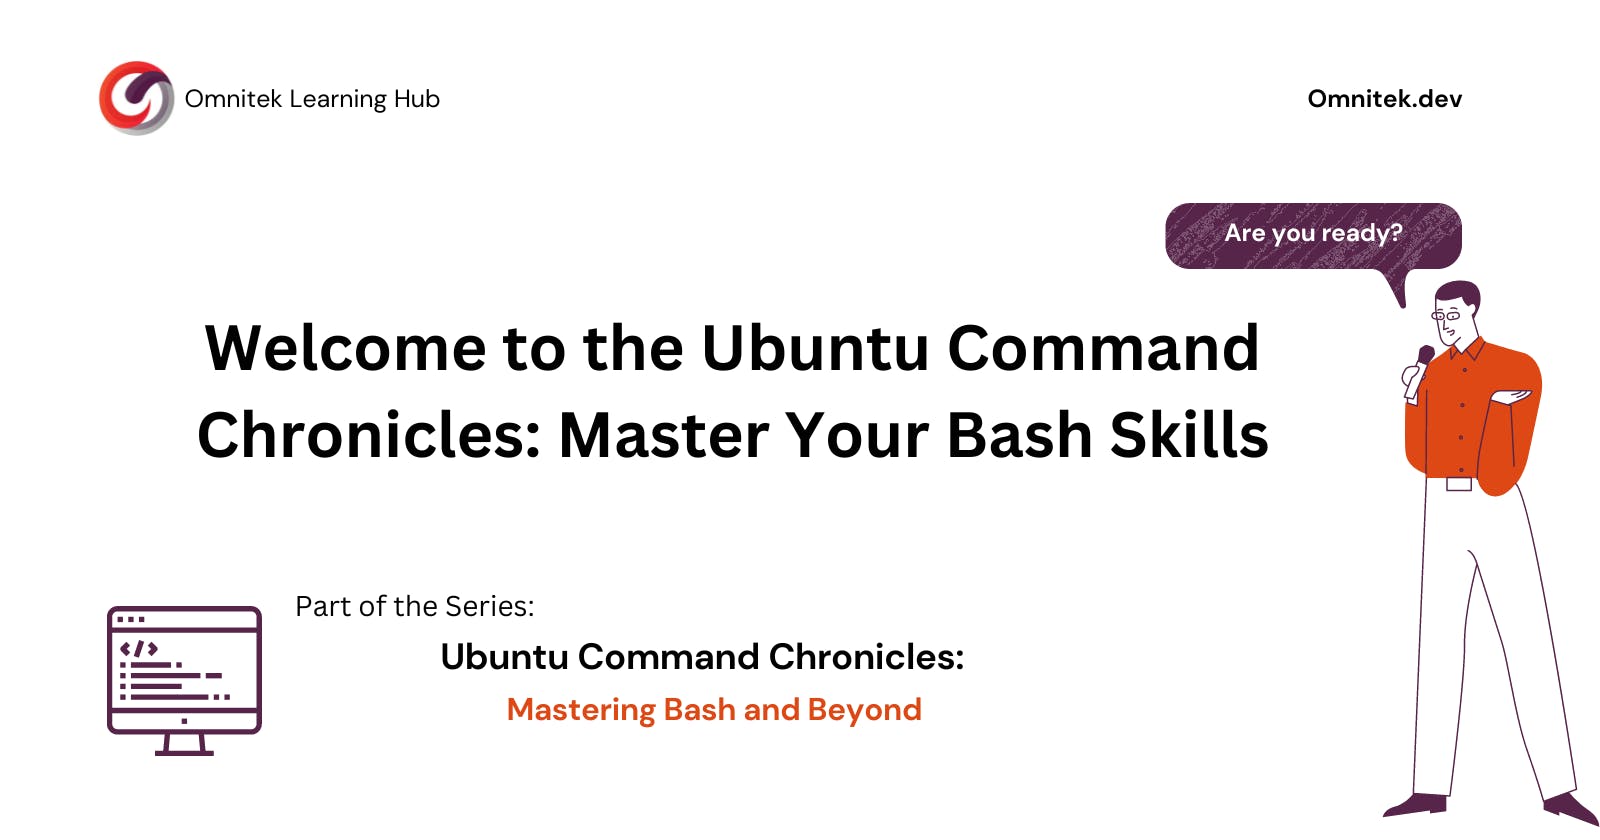 Welcome to the Ubuntu Command Chronicles: Master Your Bash Skills